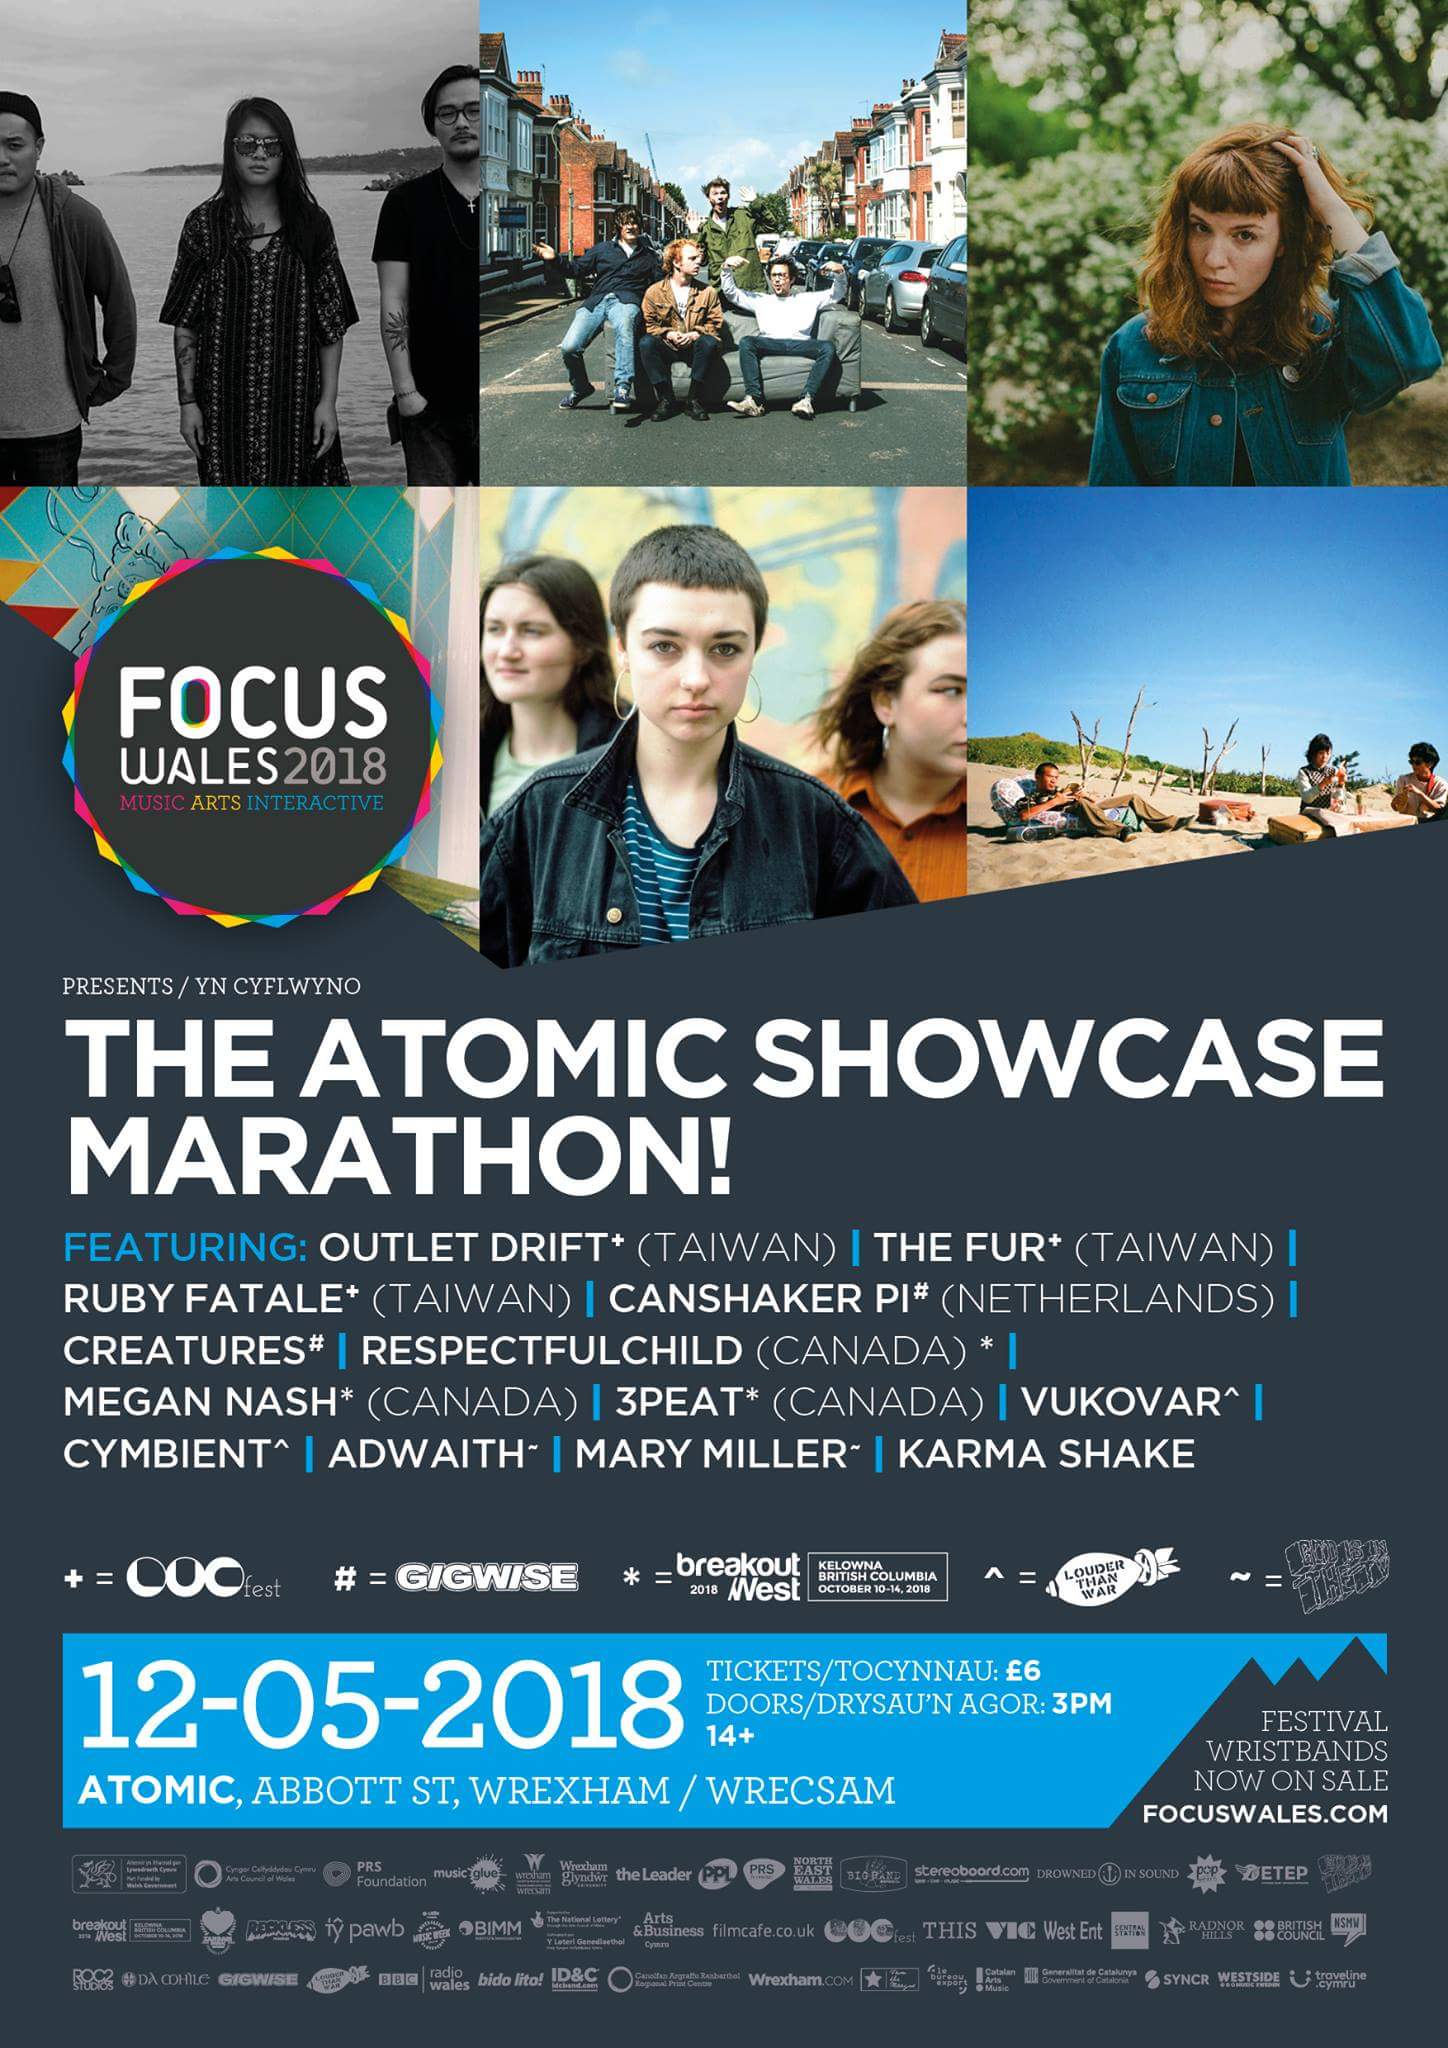 NEWS: Adwaith & Mary Miller our picks for The Atomic Showcase Marathon at FOCUS Wales